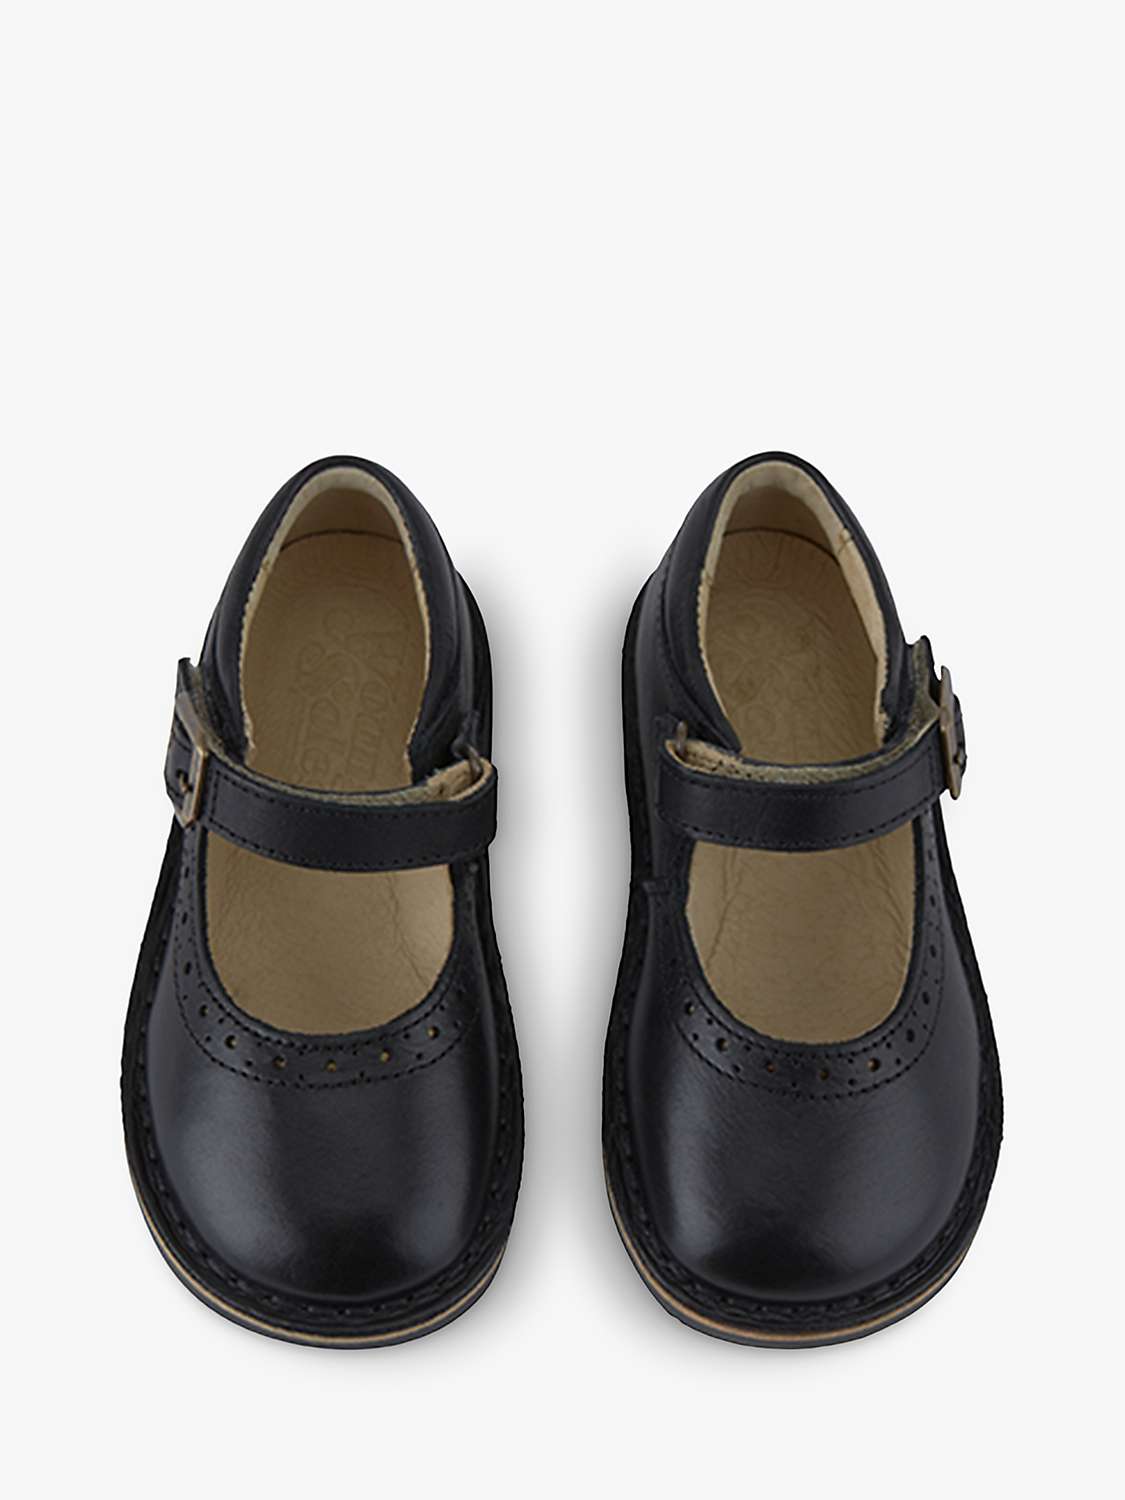 Buy Young Soles Kids' Martha Leather Mary Jane Shoes Online at johnlewis.com